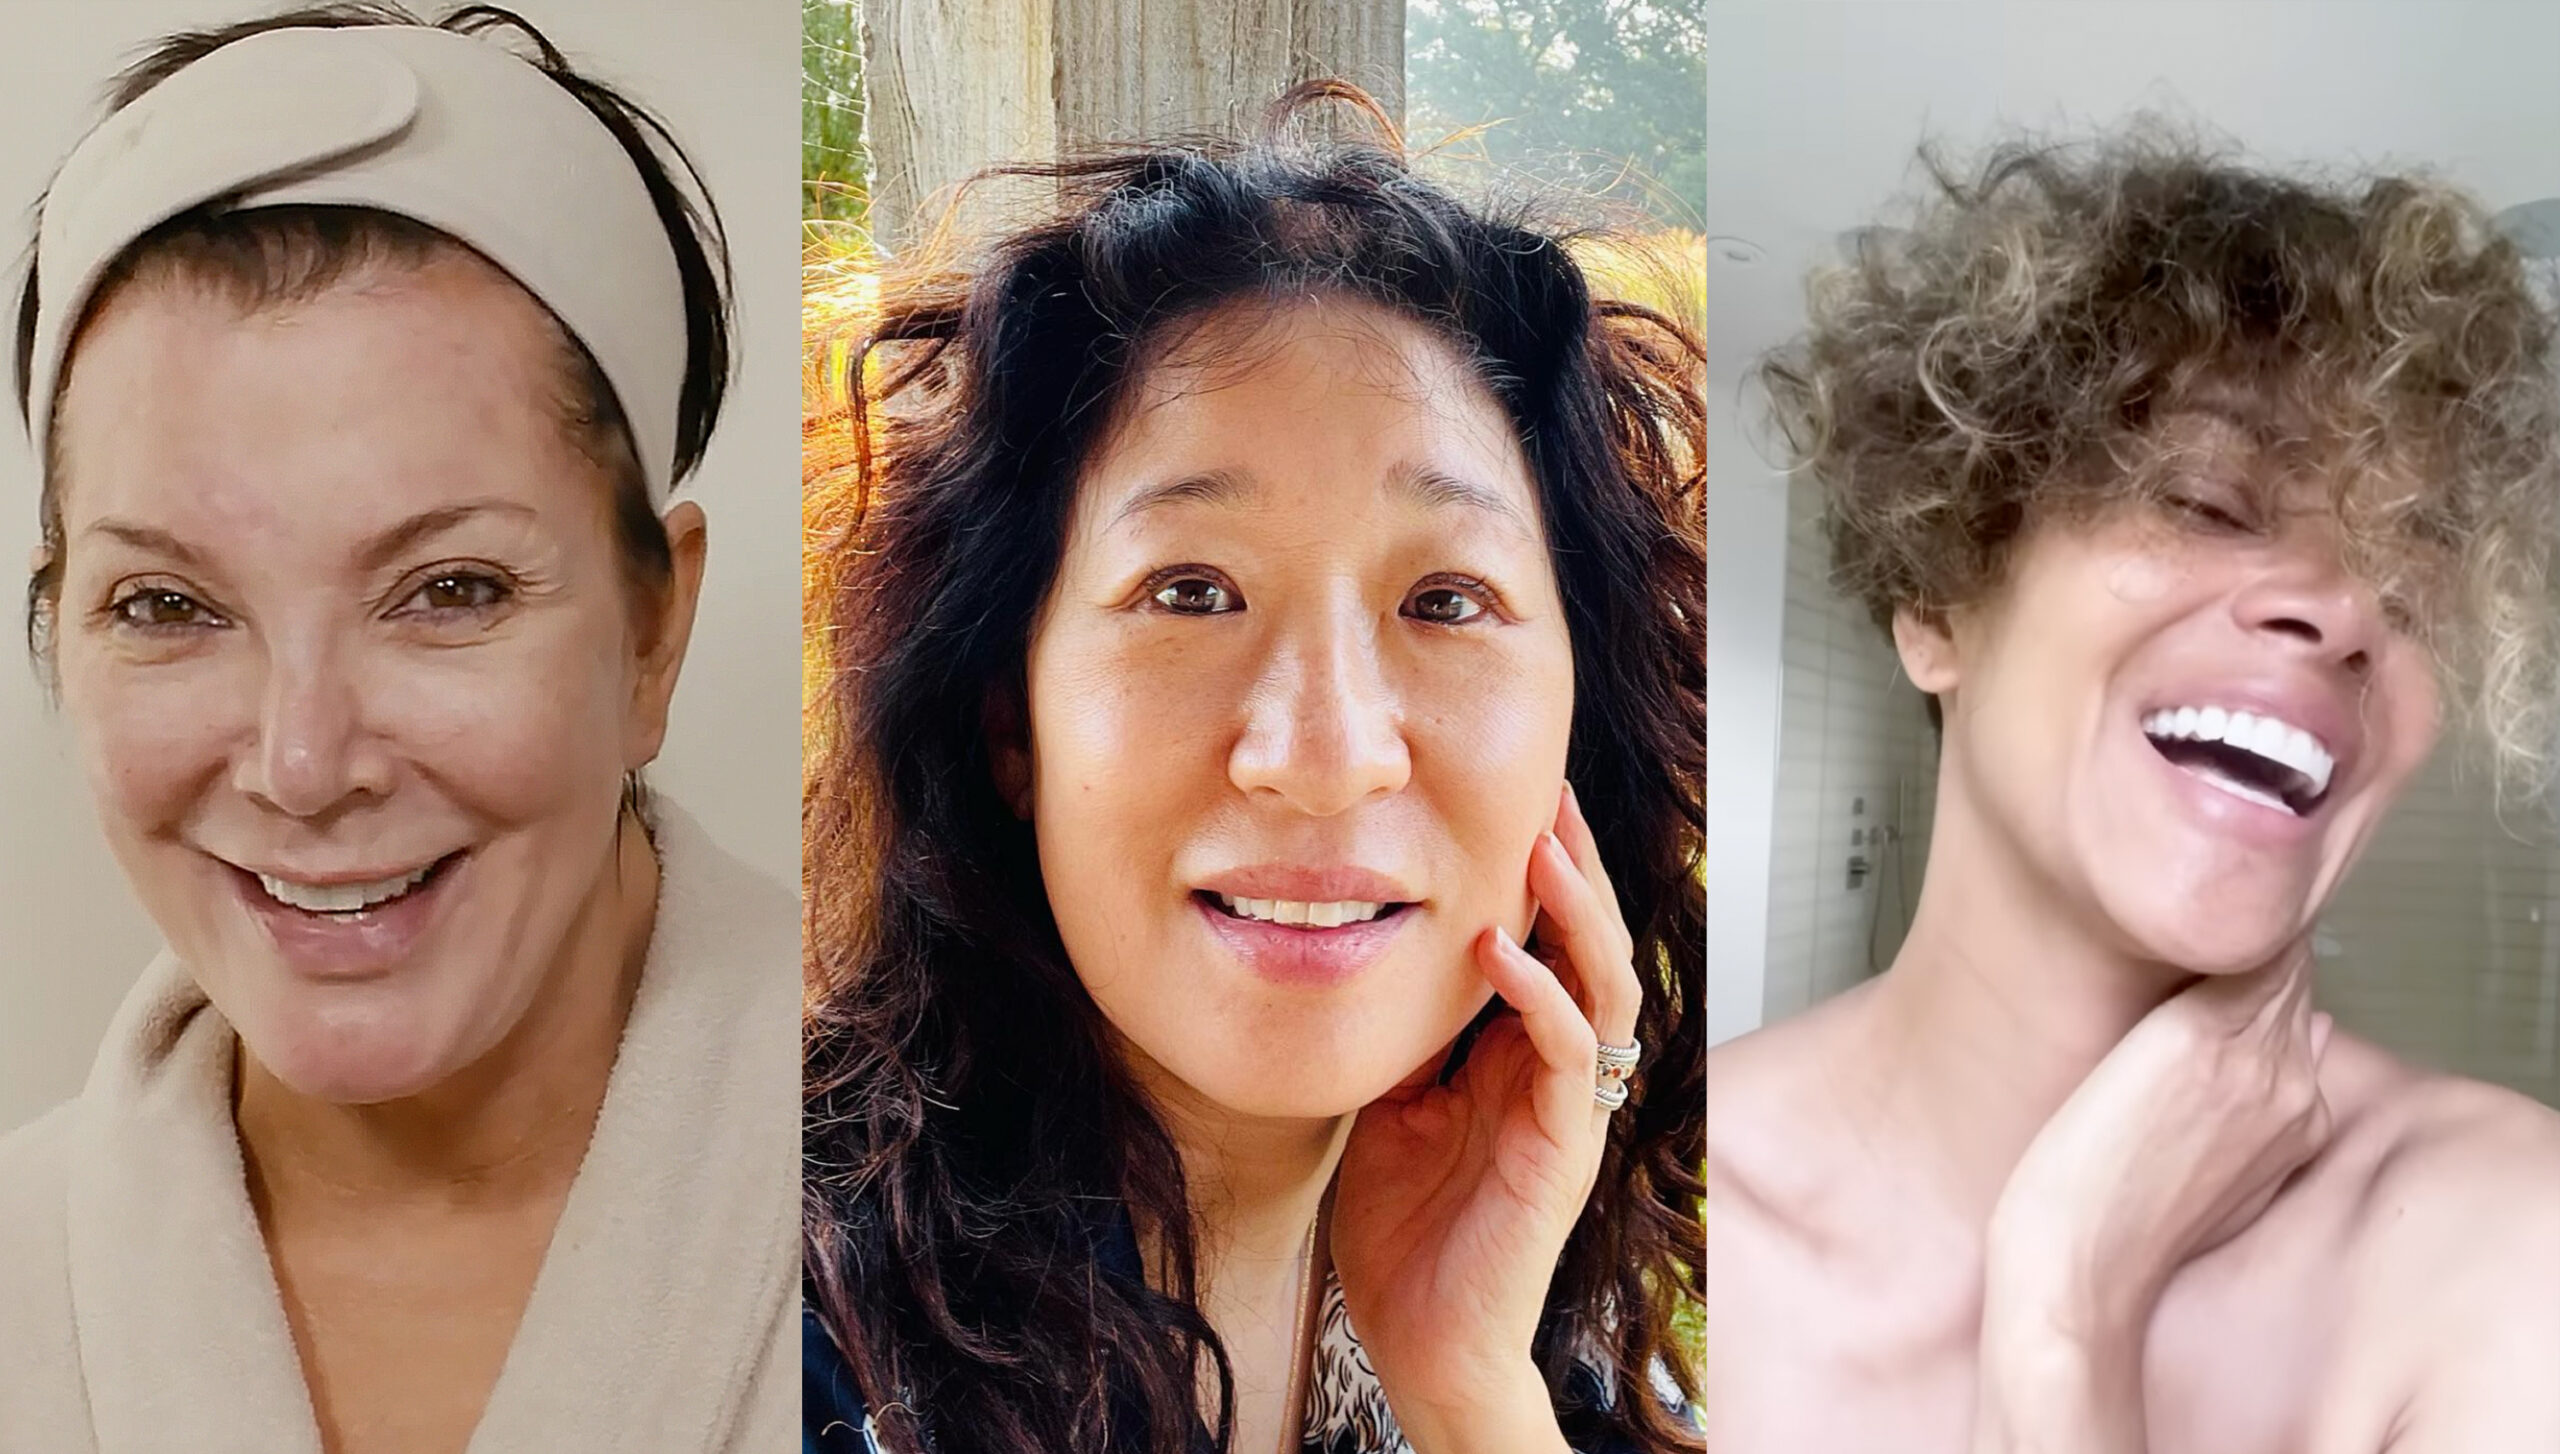 Celebrity Selfies That Prove Makeup-Free Skin Over 50 Is Gorgeous